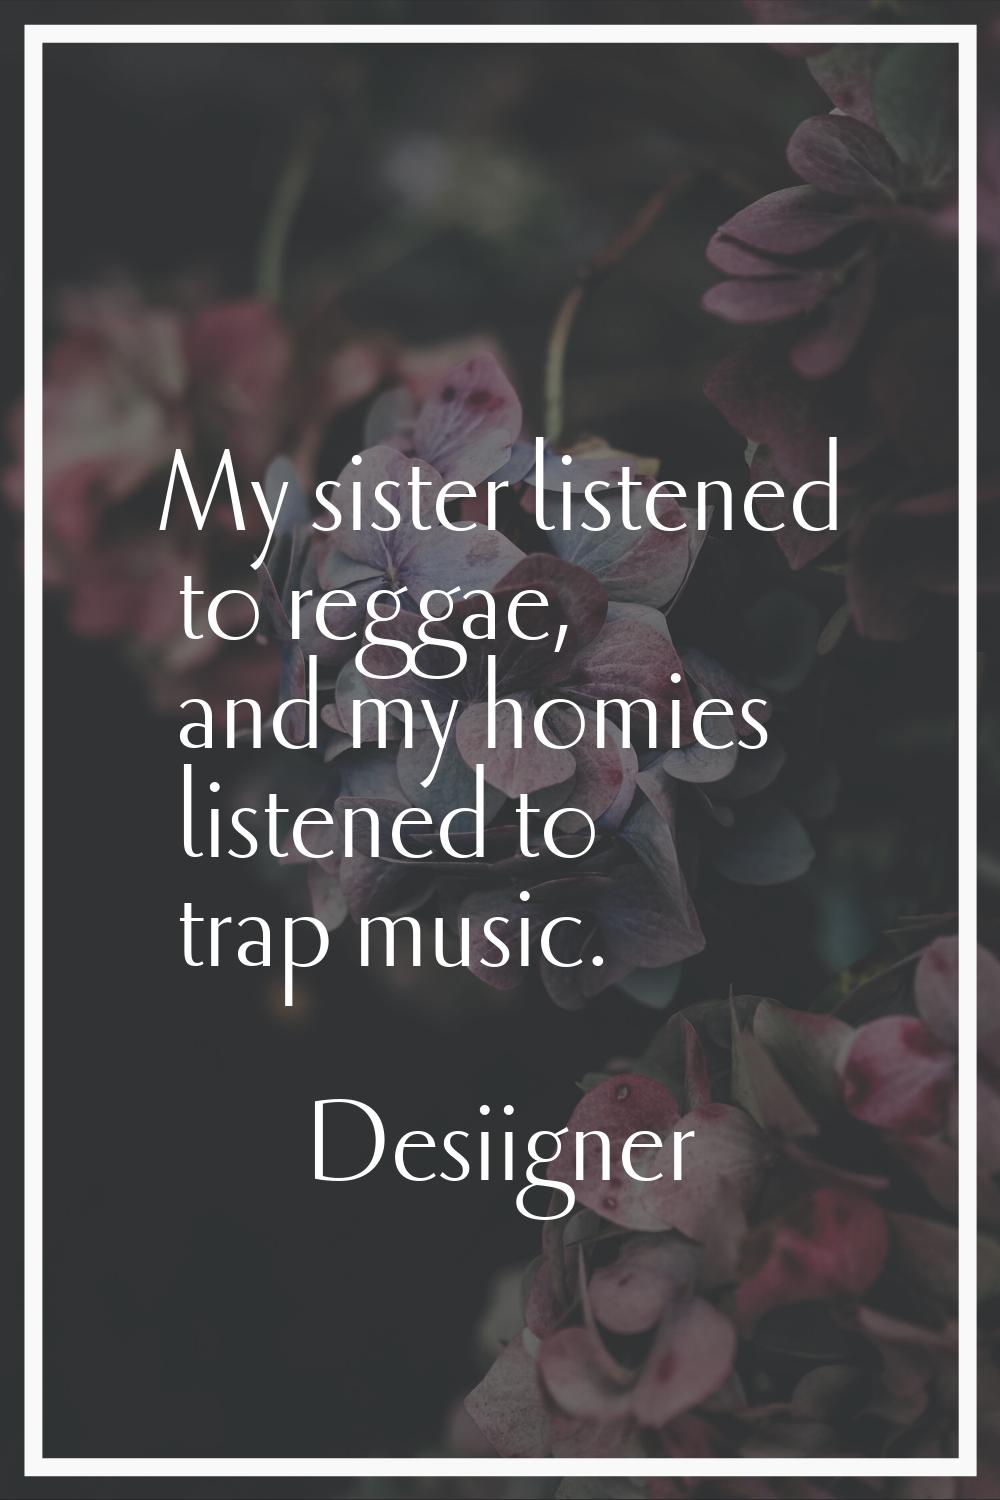 My sister listened to reggae, and my homies listened to trap music.